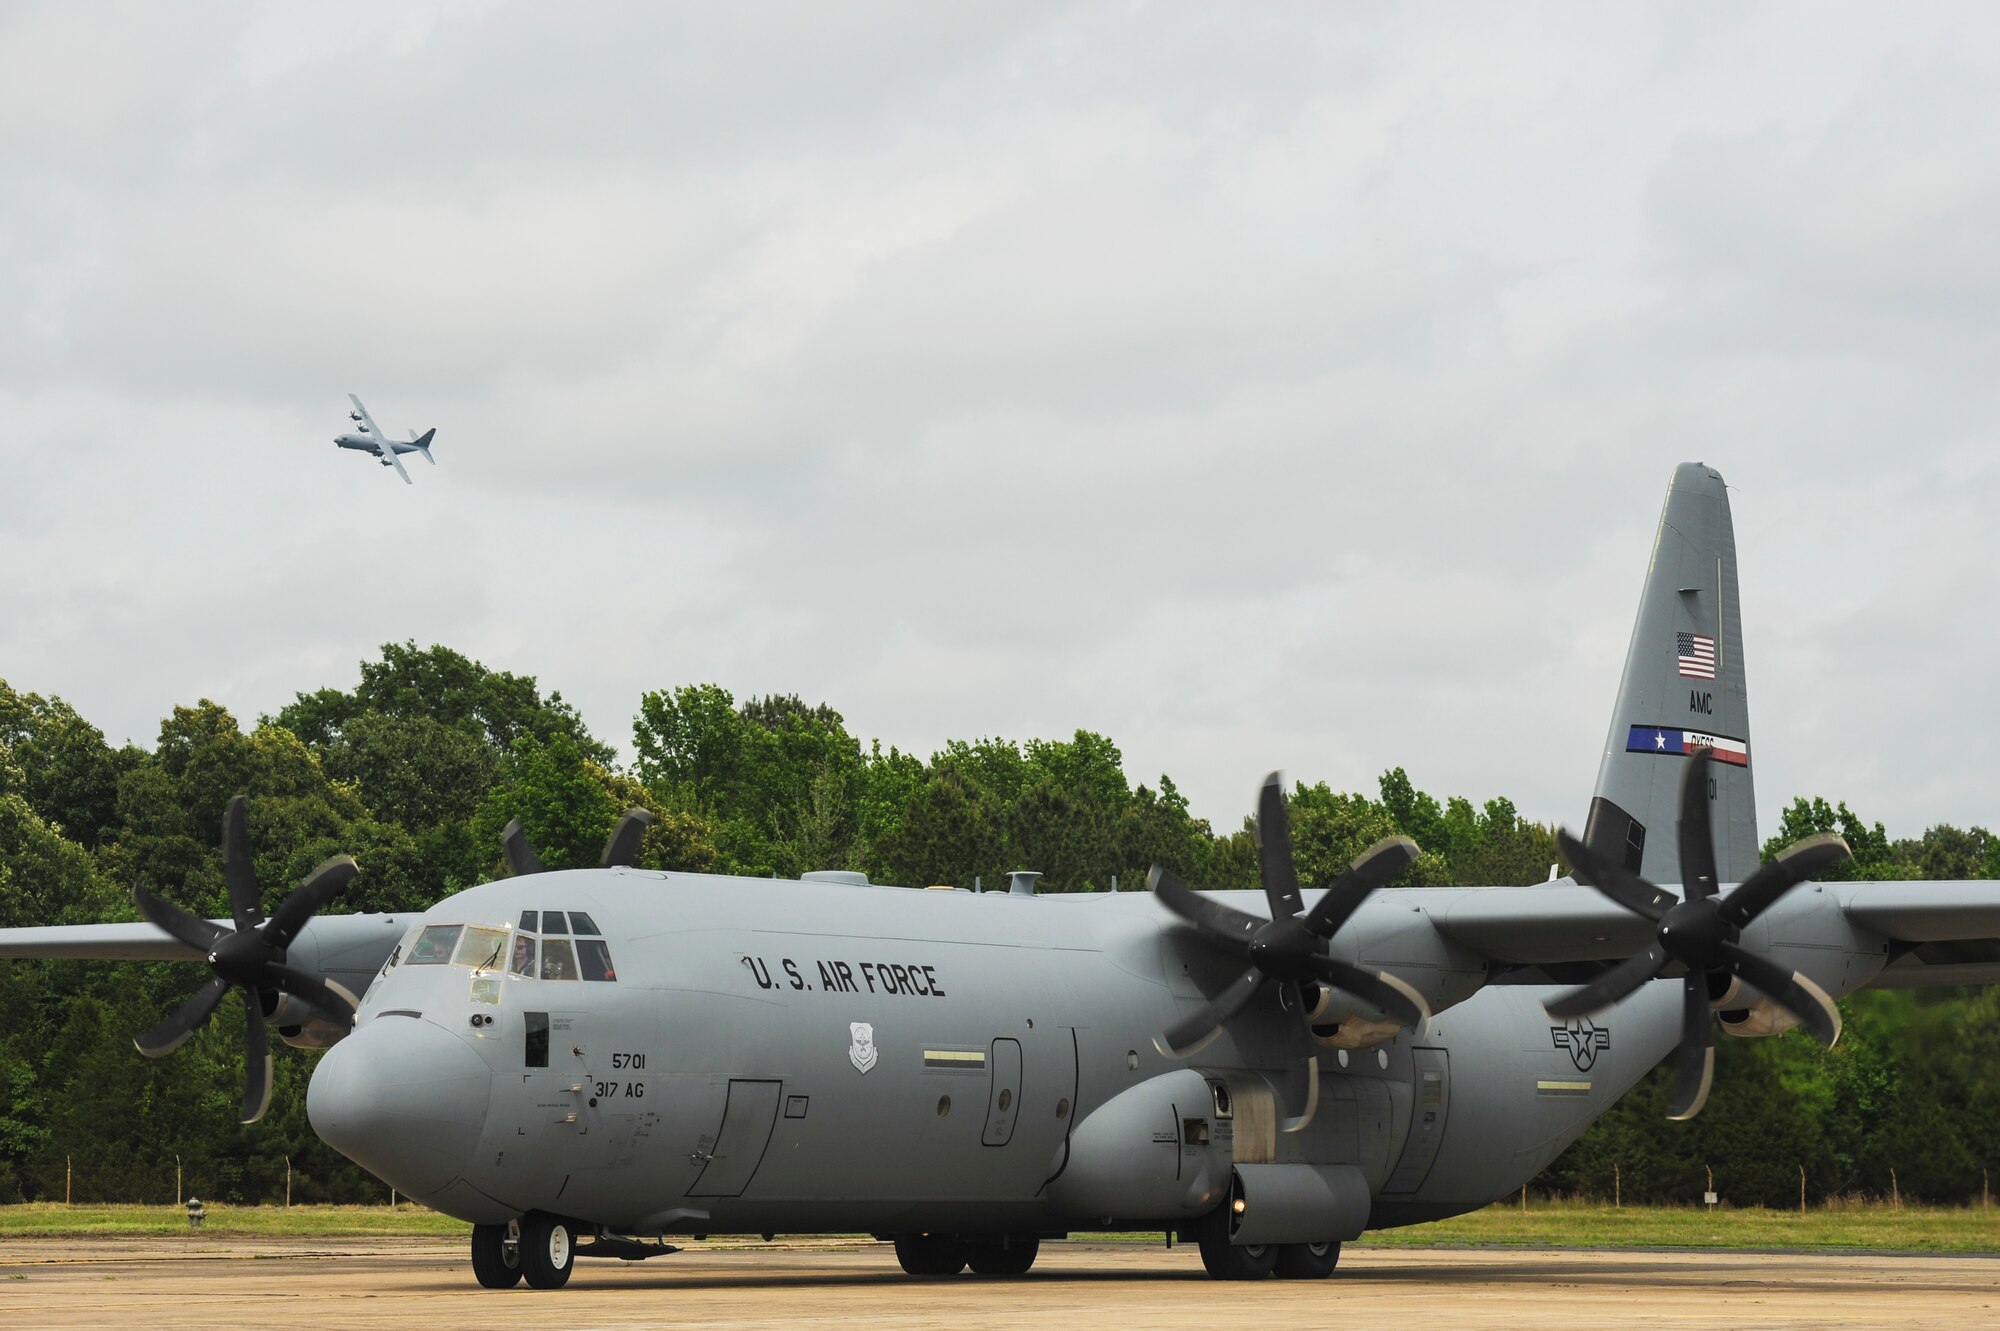 A C-130J prepares to land as another C-130J on the ground prepares for departure May 20, 2015, at Little Rock Air Force Base, Ark. The C-130 is one of the most versatile cargo delivery aircraft in the U.S. Air Force for its airdrop and air-land mission capabilities (U.S. Air Force photo by Senior Airman Harry Brexel)